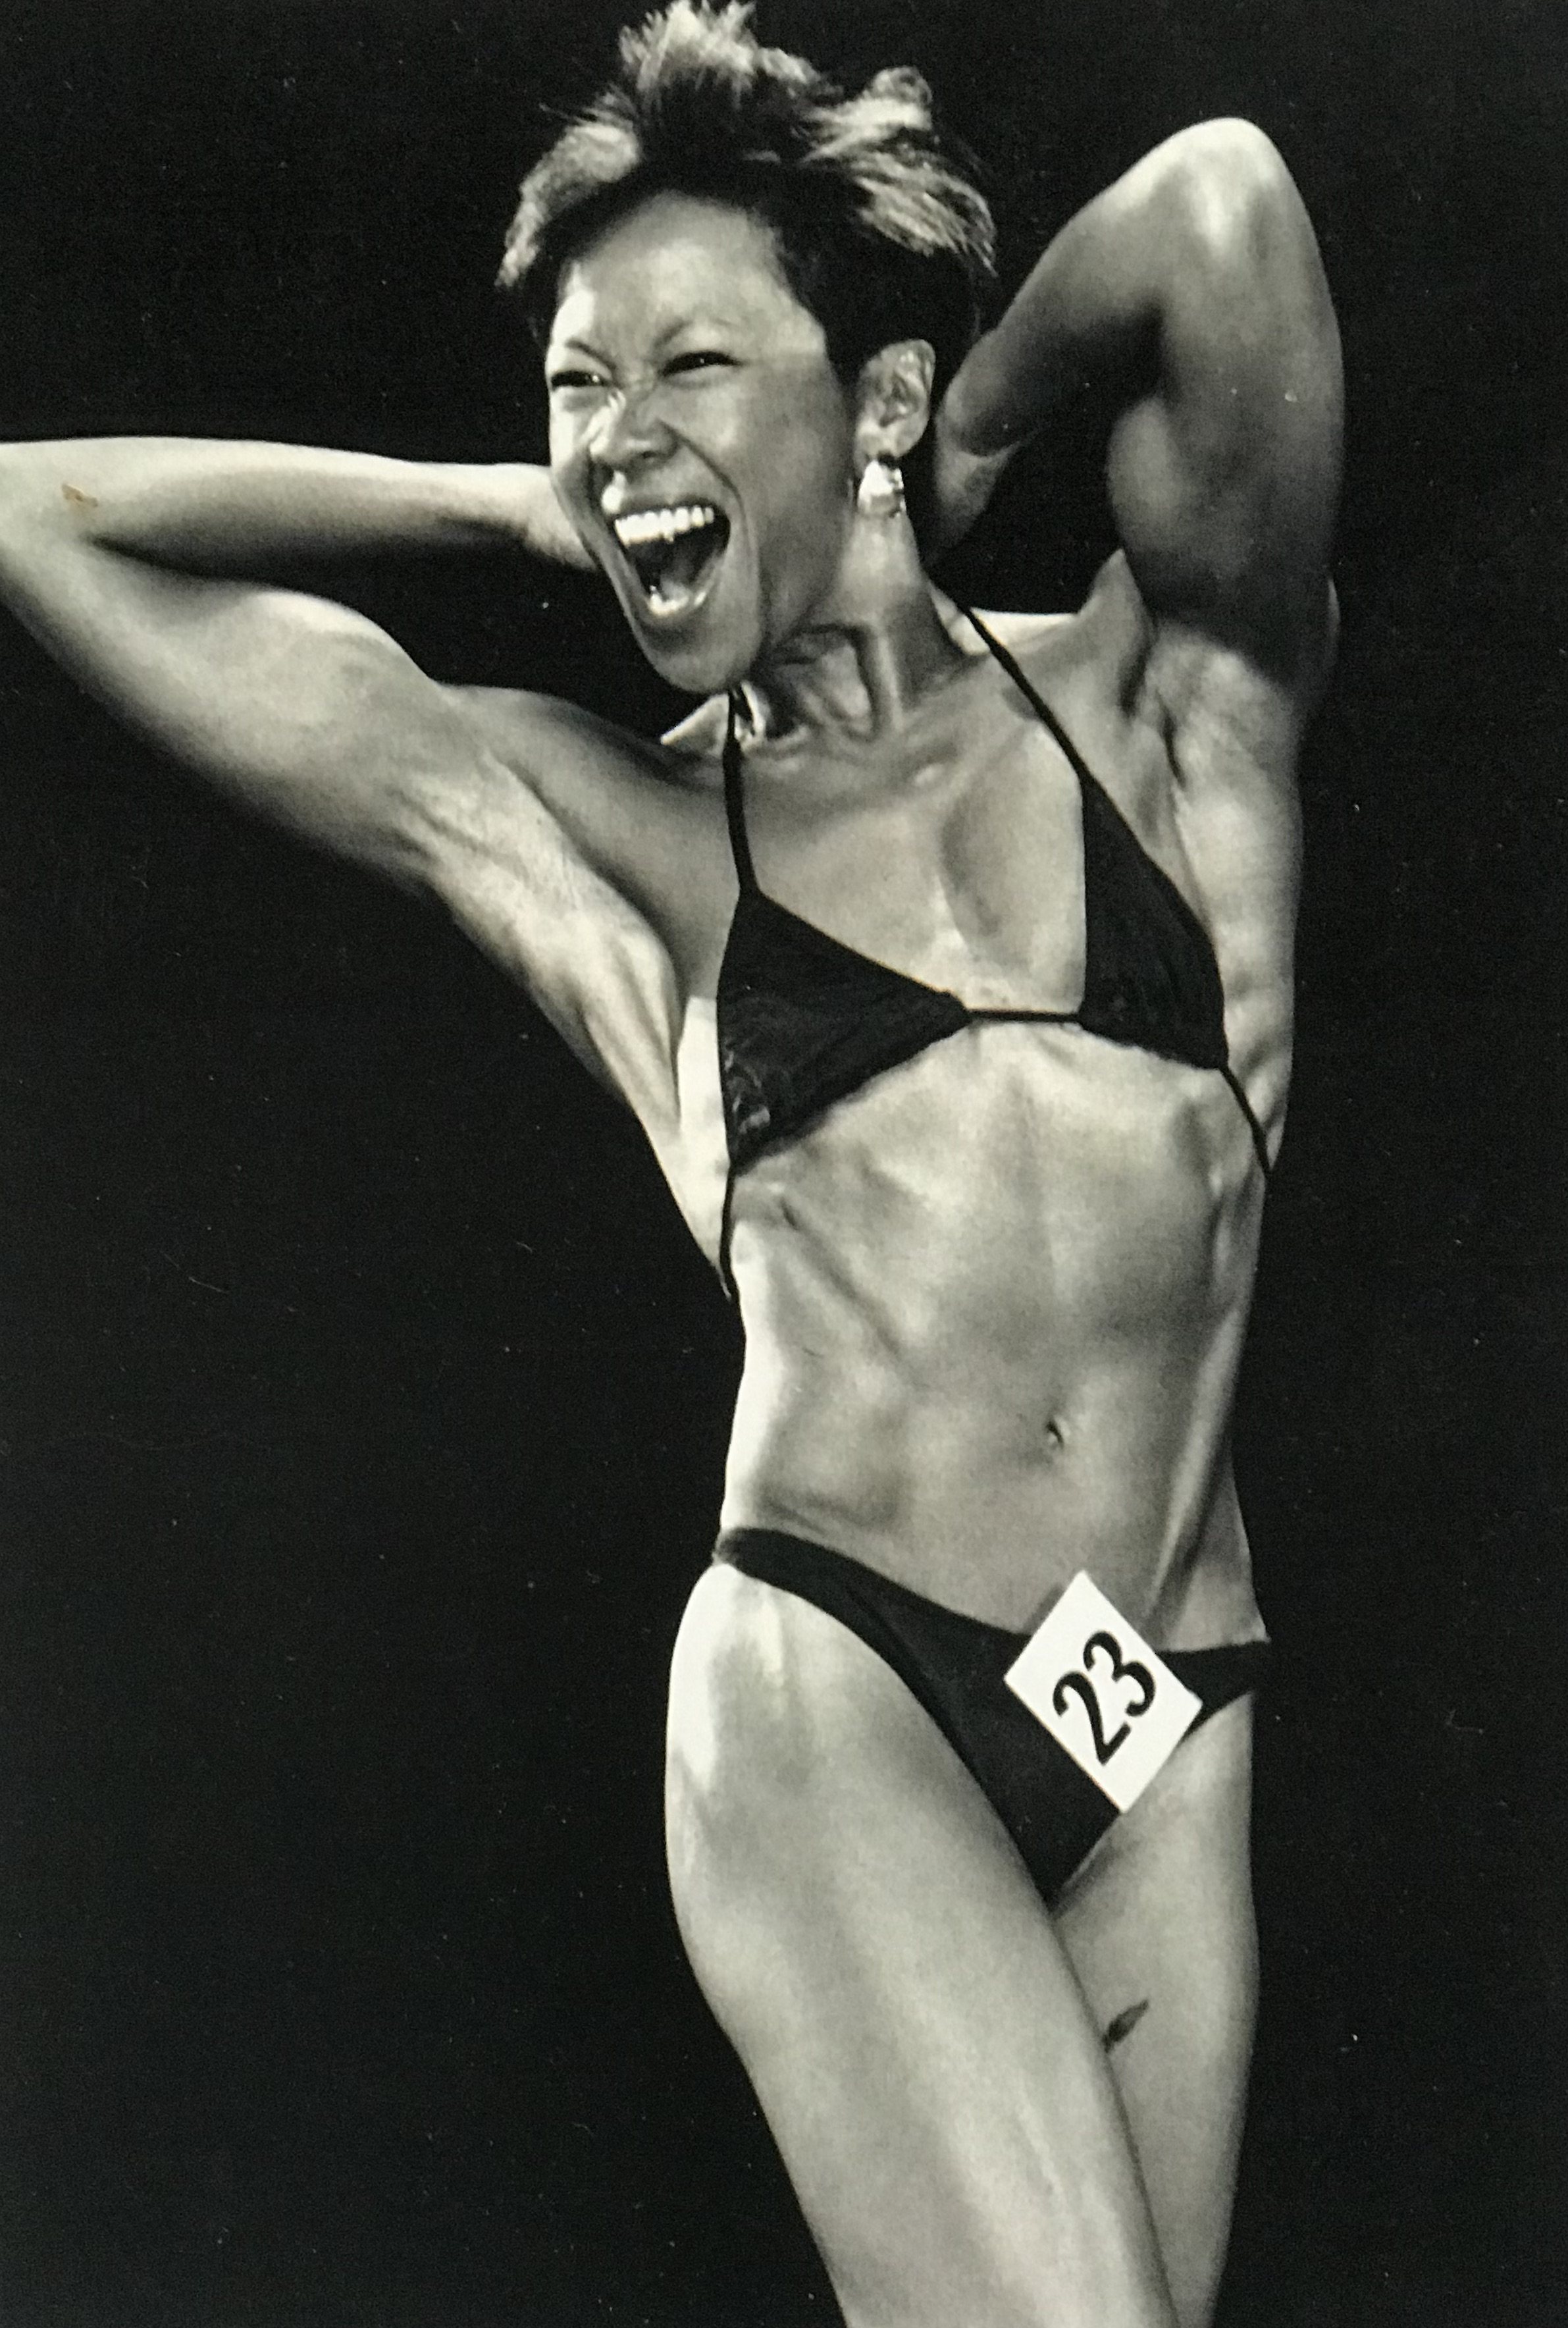 Kitty Tsui at Gay Games 2 in San Francisco, the US, in 1986, at which the Asian-American LGBTQ pioneer won a  bronze medal for physique in the lightweight category. Photo: Kitty Tsui